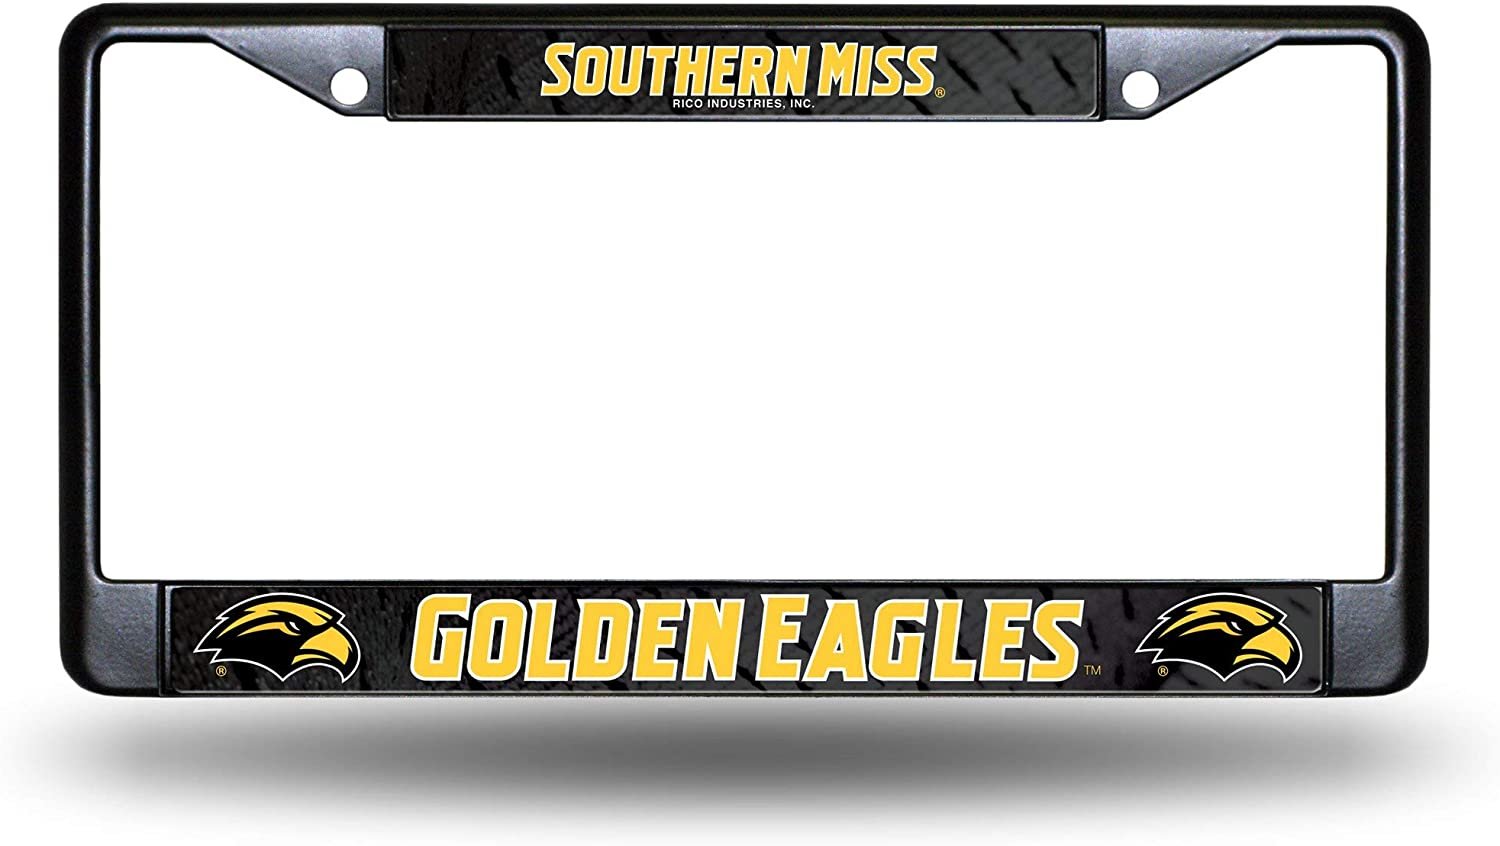 University of Southern Mississippi Golden Eagles Black Metal License Plate Frame Tag Cover Chrome 6x12 Inch